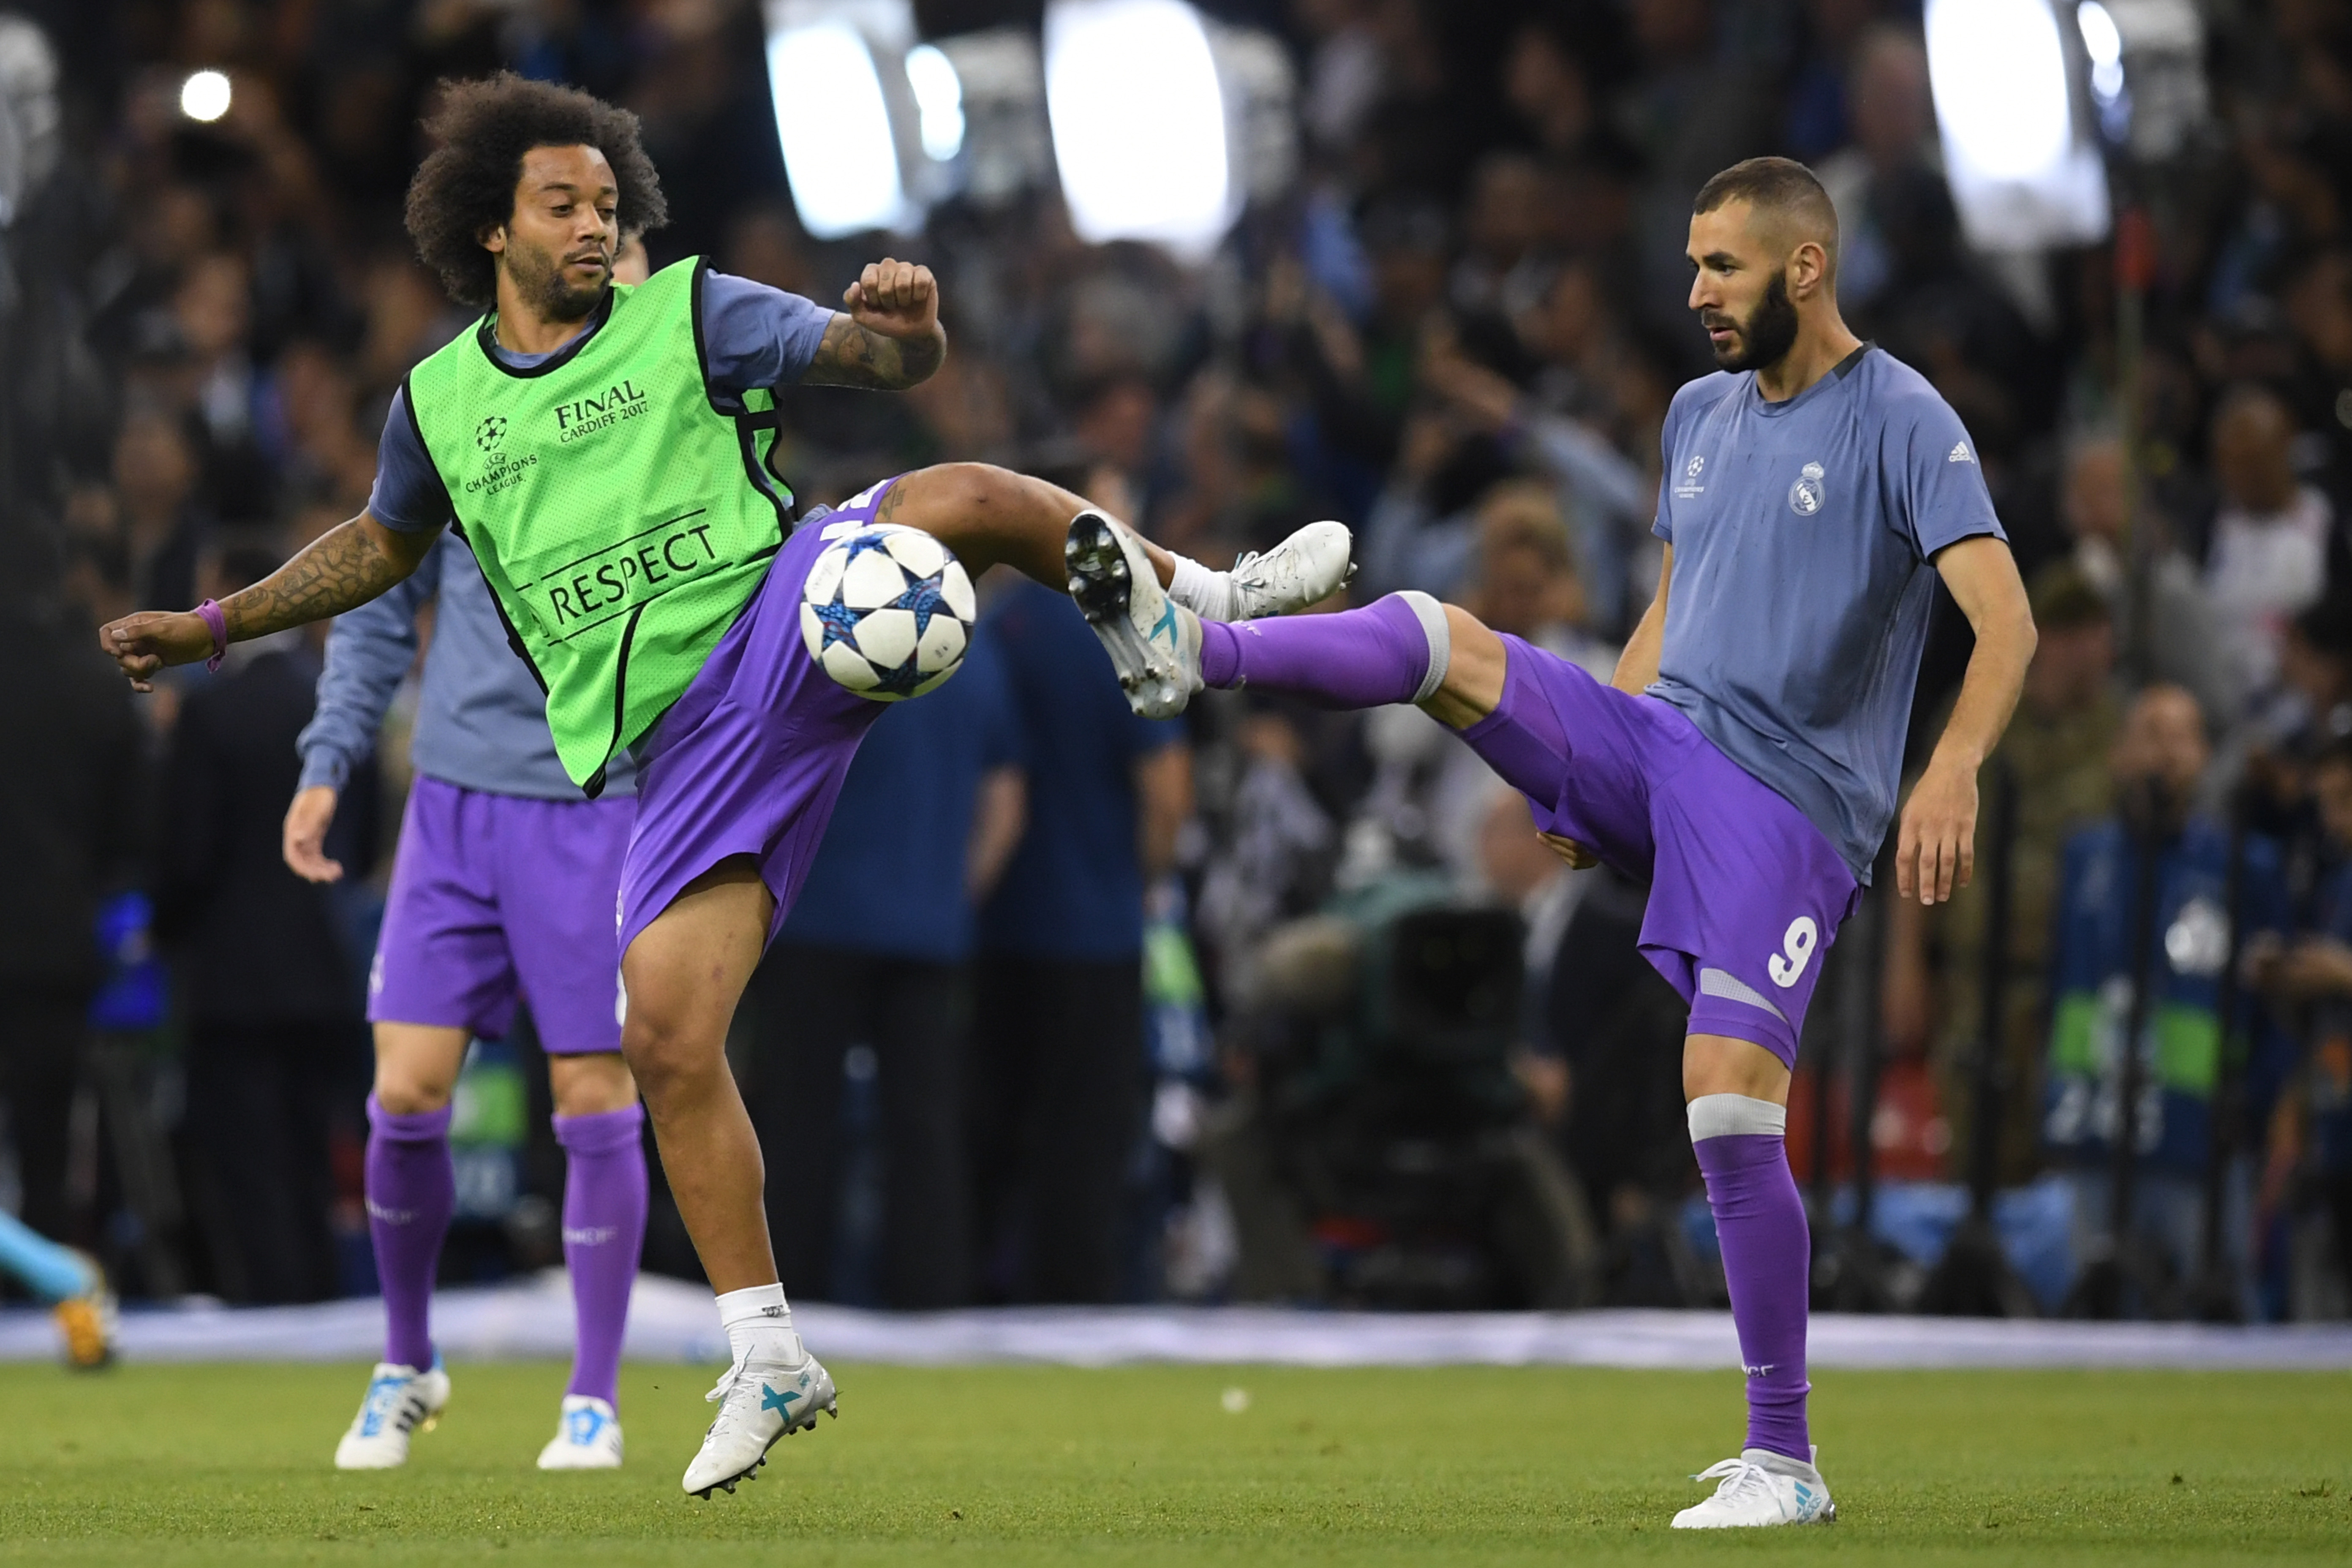 CARDIFF, WALES - JUNE 03: Marcelo of Real Madrid and Karim Benzema of Real Madrid warm up prior to the UEFA Champions League Final between Juventus and Real Madrid at National Stadium of Wales on June 3, 2017 in Cardiff, Wales.  (Photo by Matthias Hangst/Getty Images)